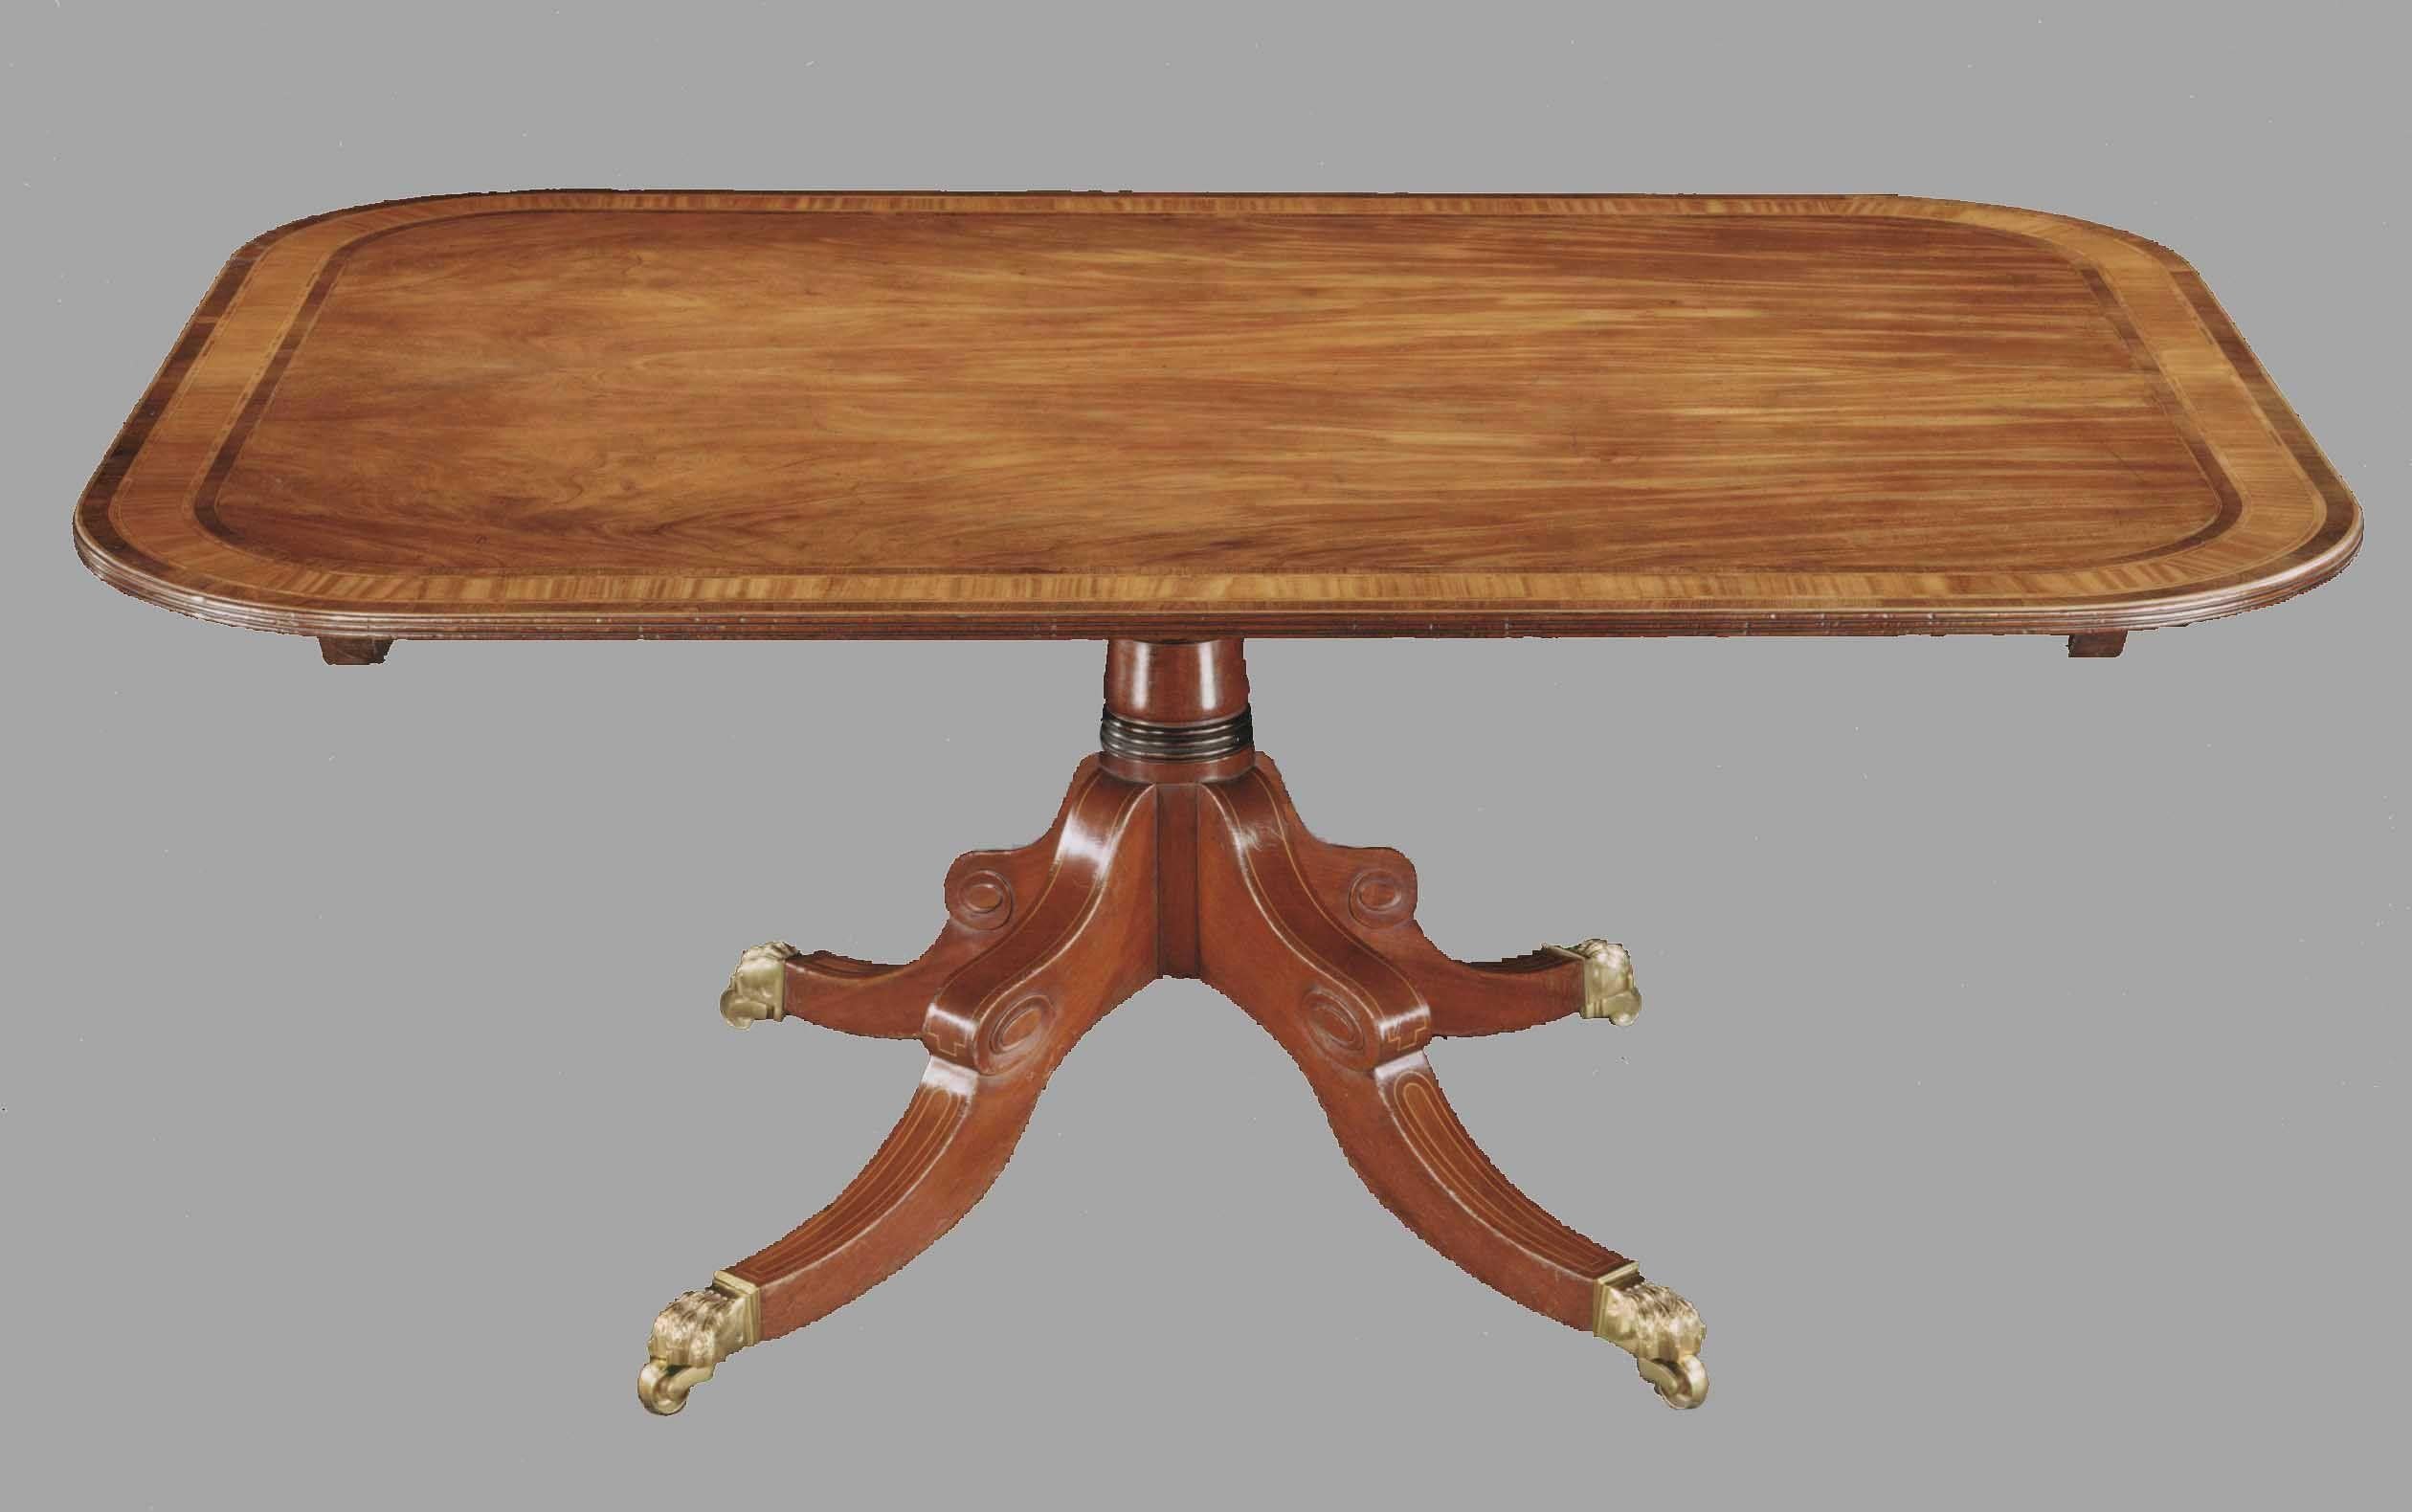 Late George III Mahogany and Satinwood Inlaid Centre Pedestal Dining Table In Good Condition For Sale In Bradford on Avon, GB